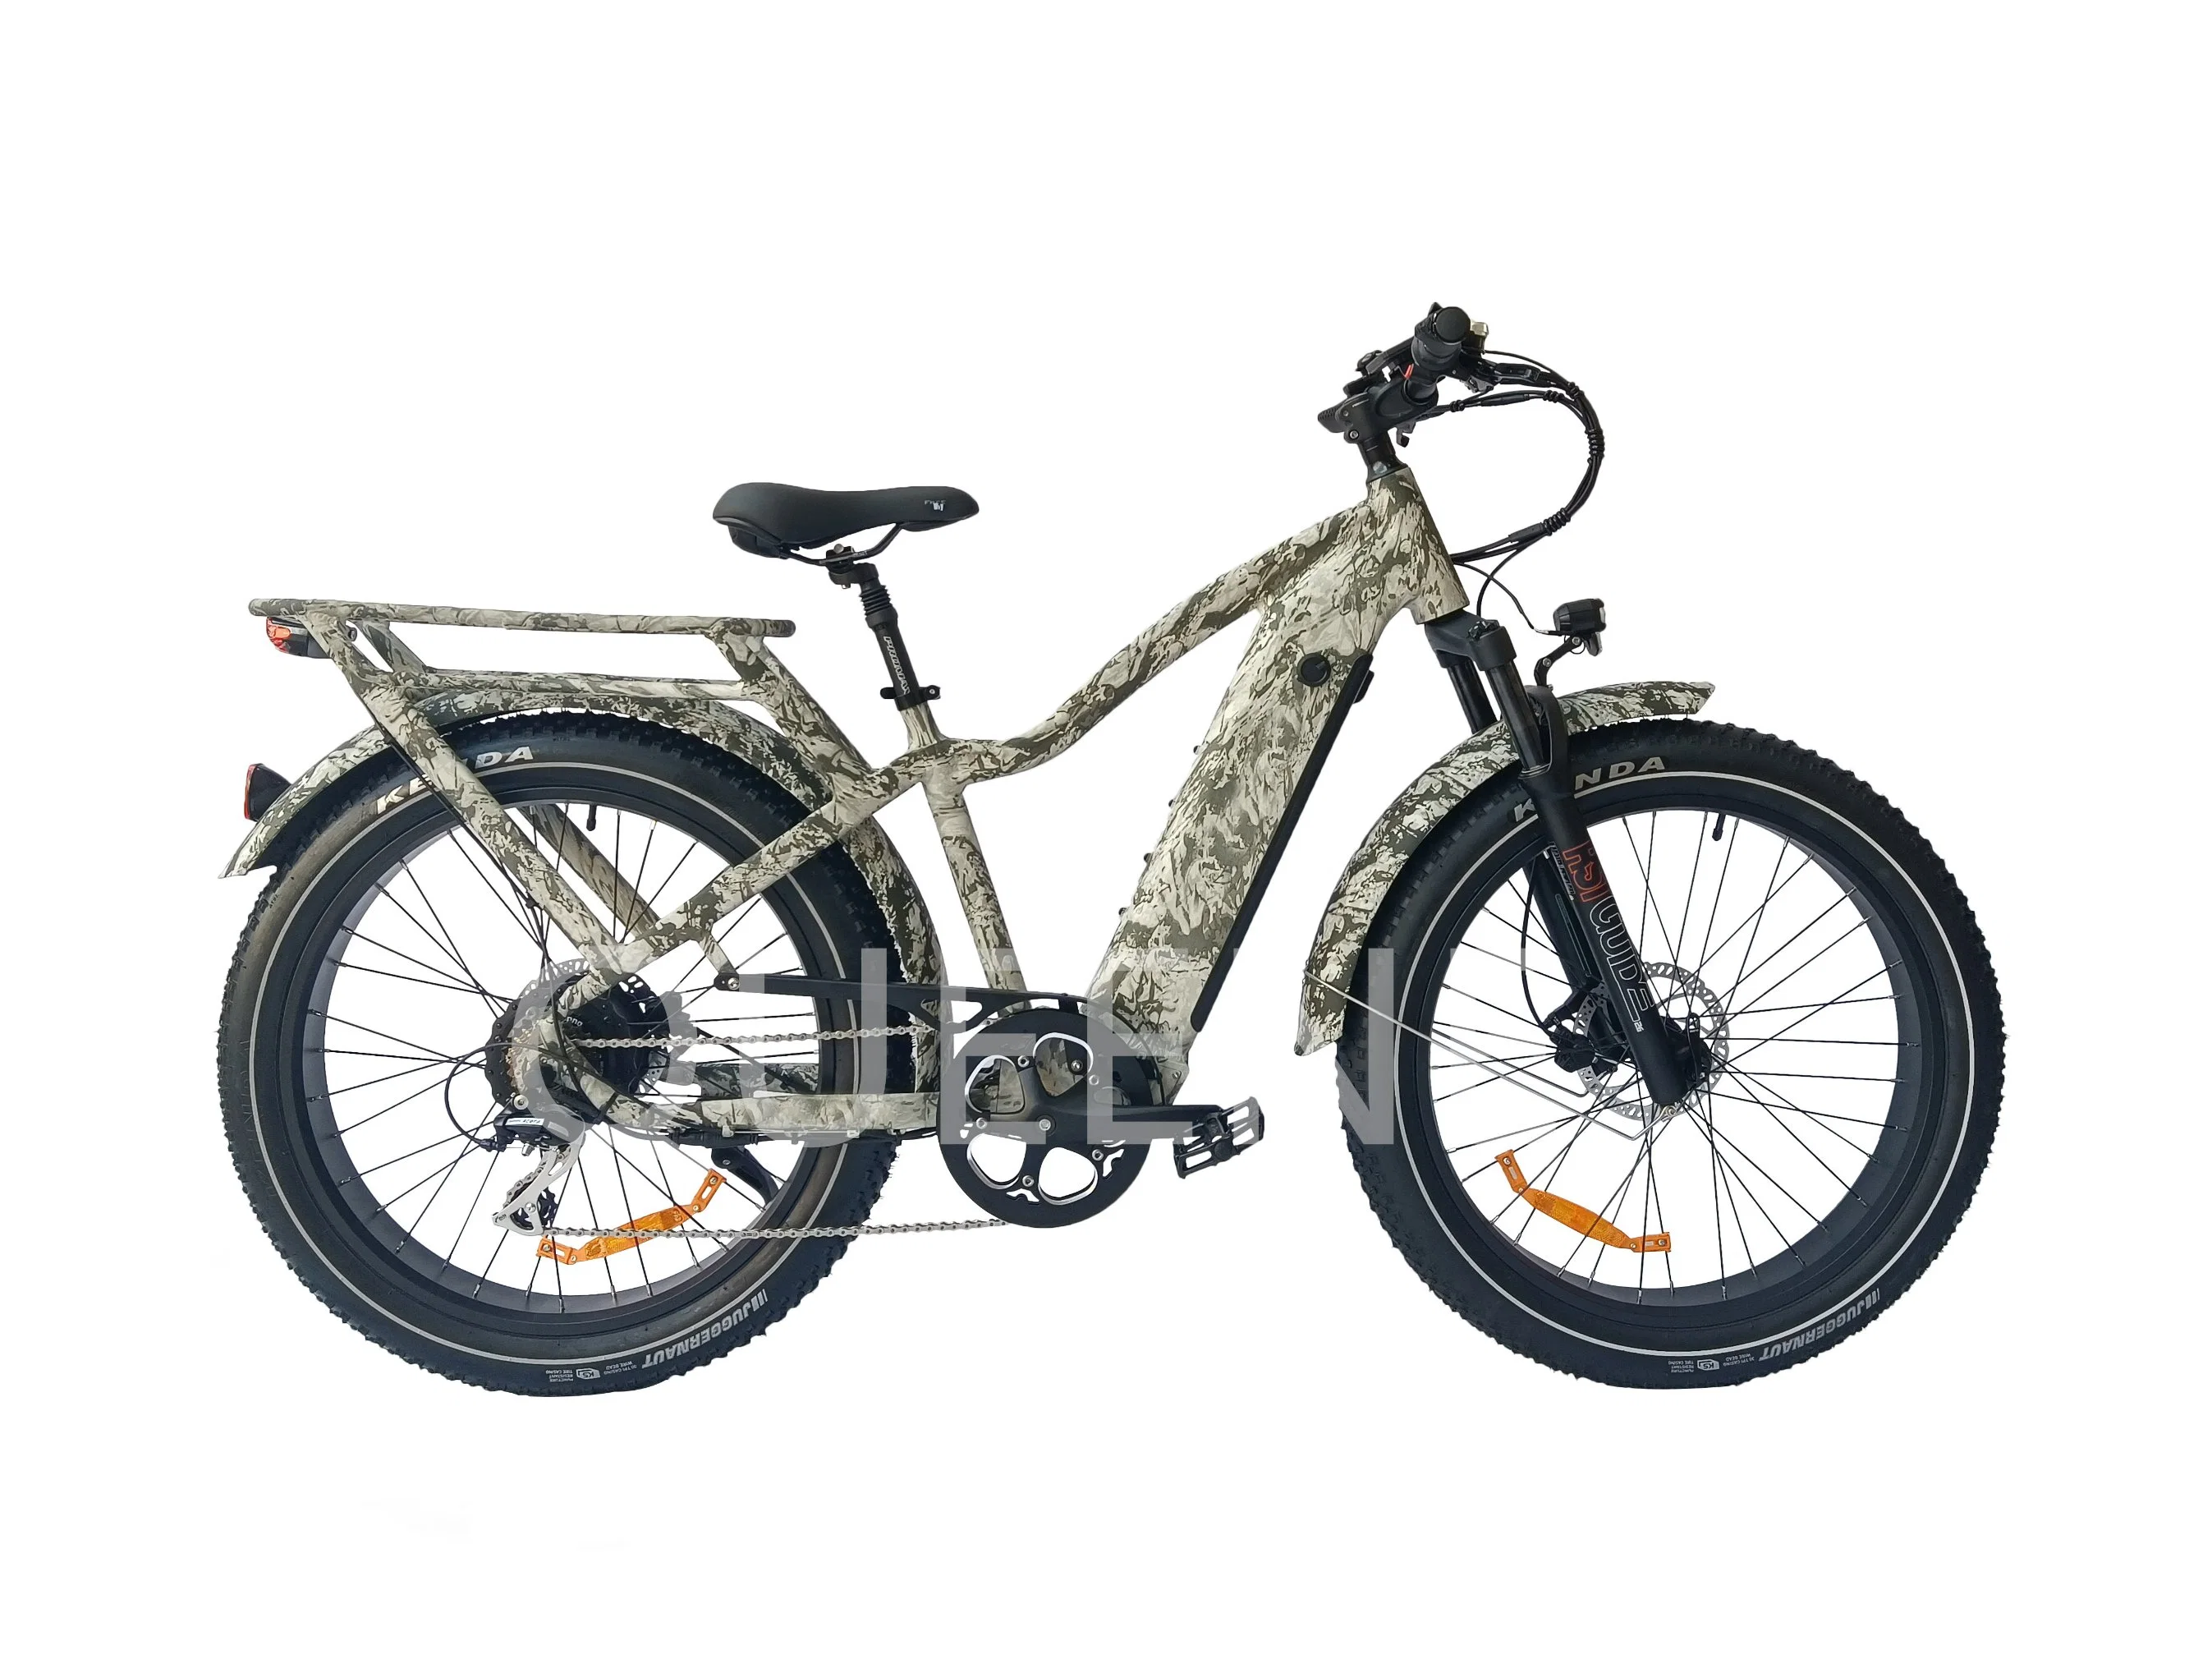 Queene Top Selling 350W 500watts Vintage Ebike with EEC/CE Certificate Retro Style Electric Bike 36V/48V Lithium Battery 26" Fat Tire